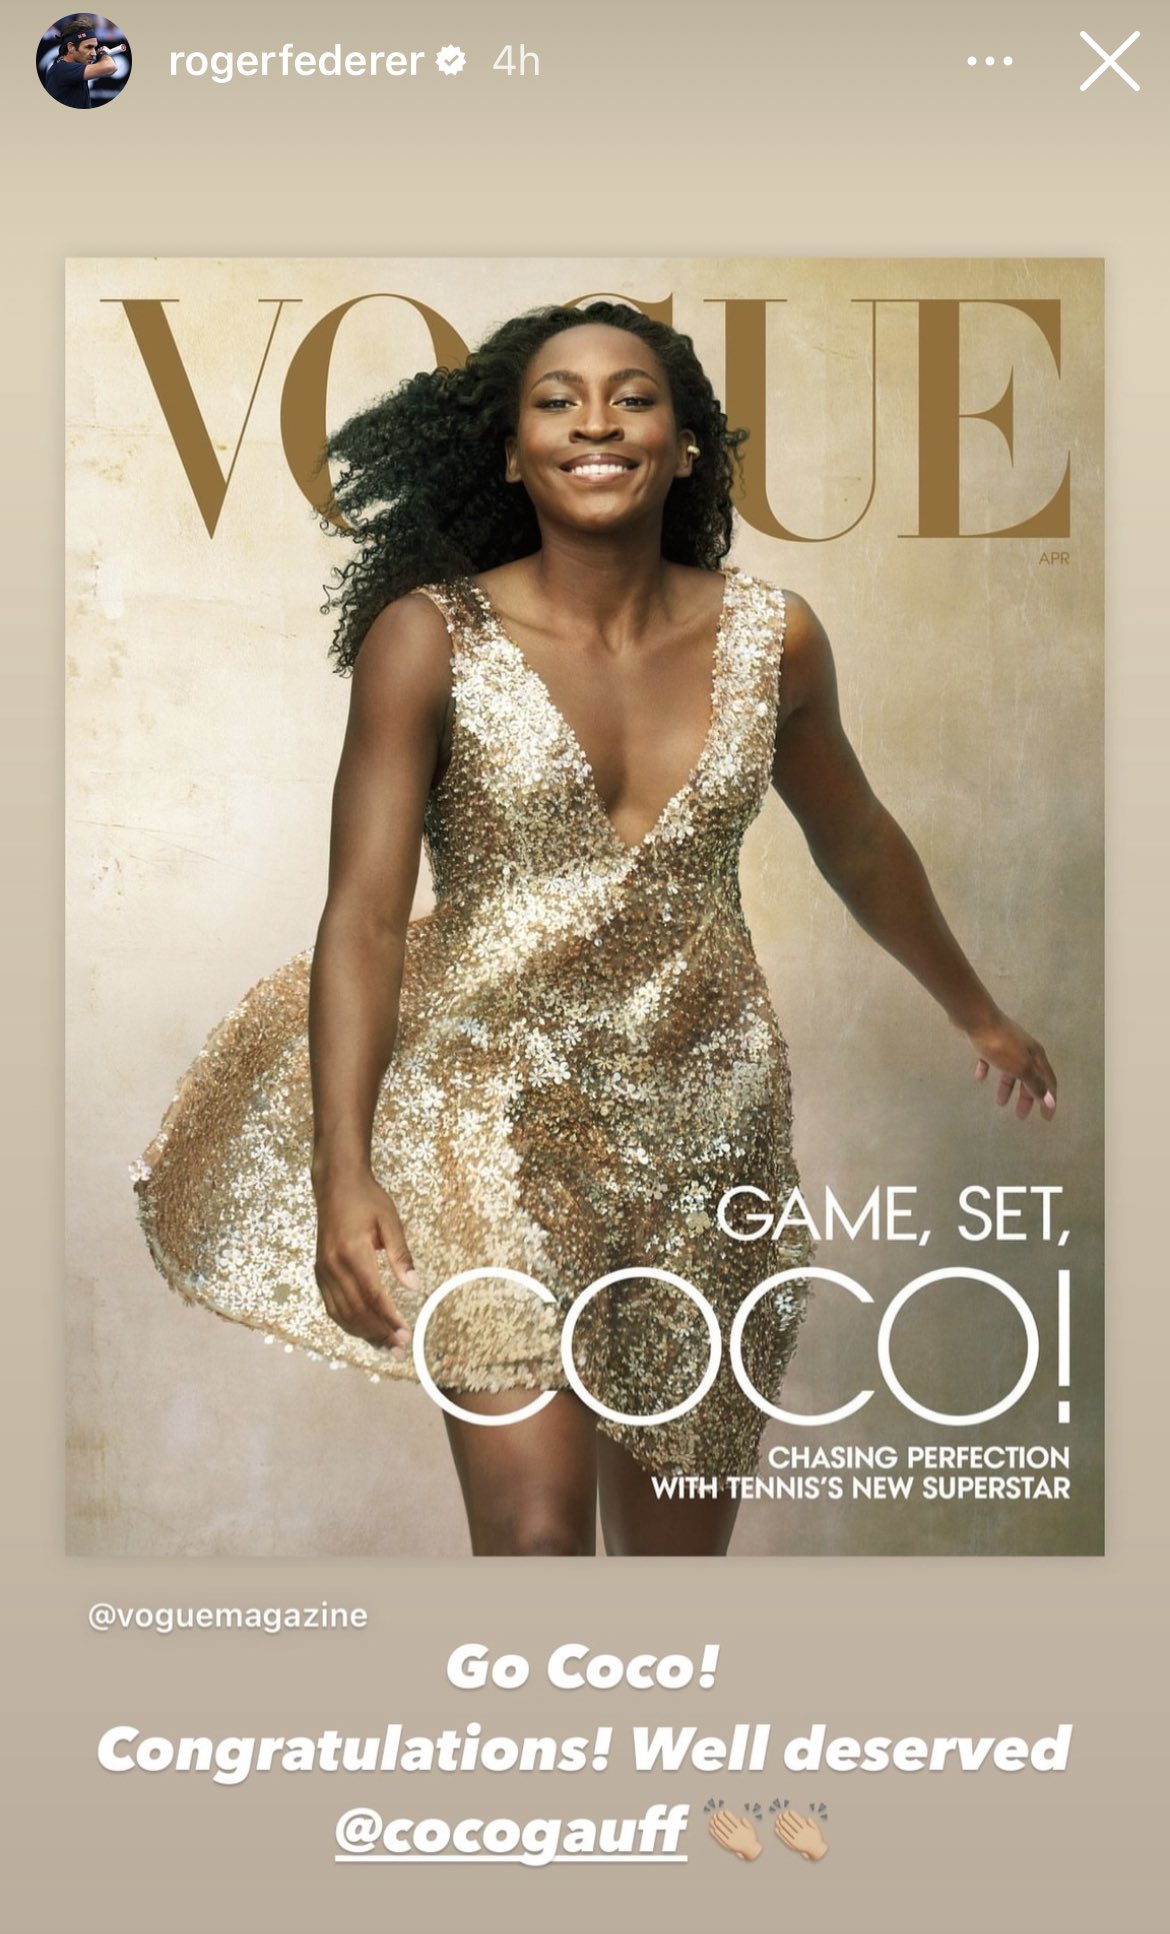 The Tennis Letter on X: Roger Federer congratulated Coco Gauff on her  first Vogue cover: “Go Coco! Congratulations! Well deserved.” 🥹   / X